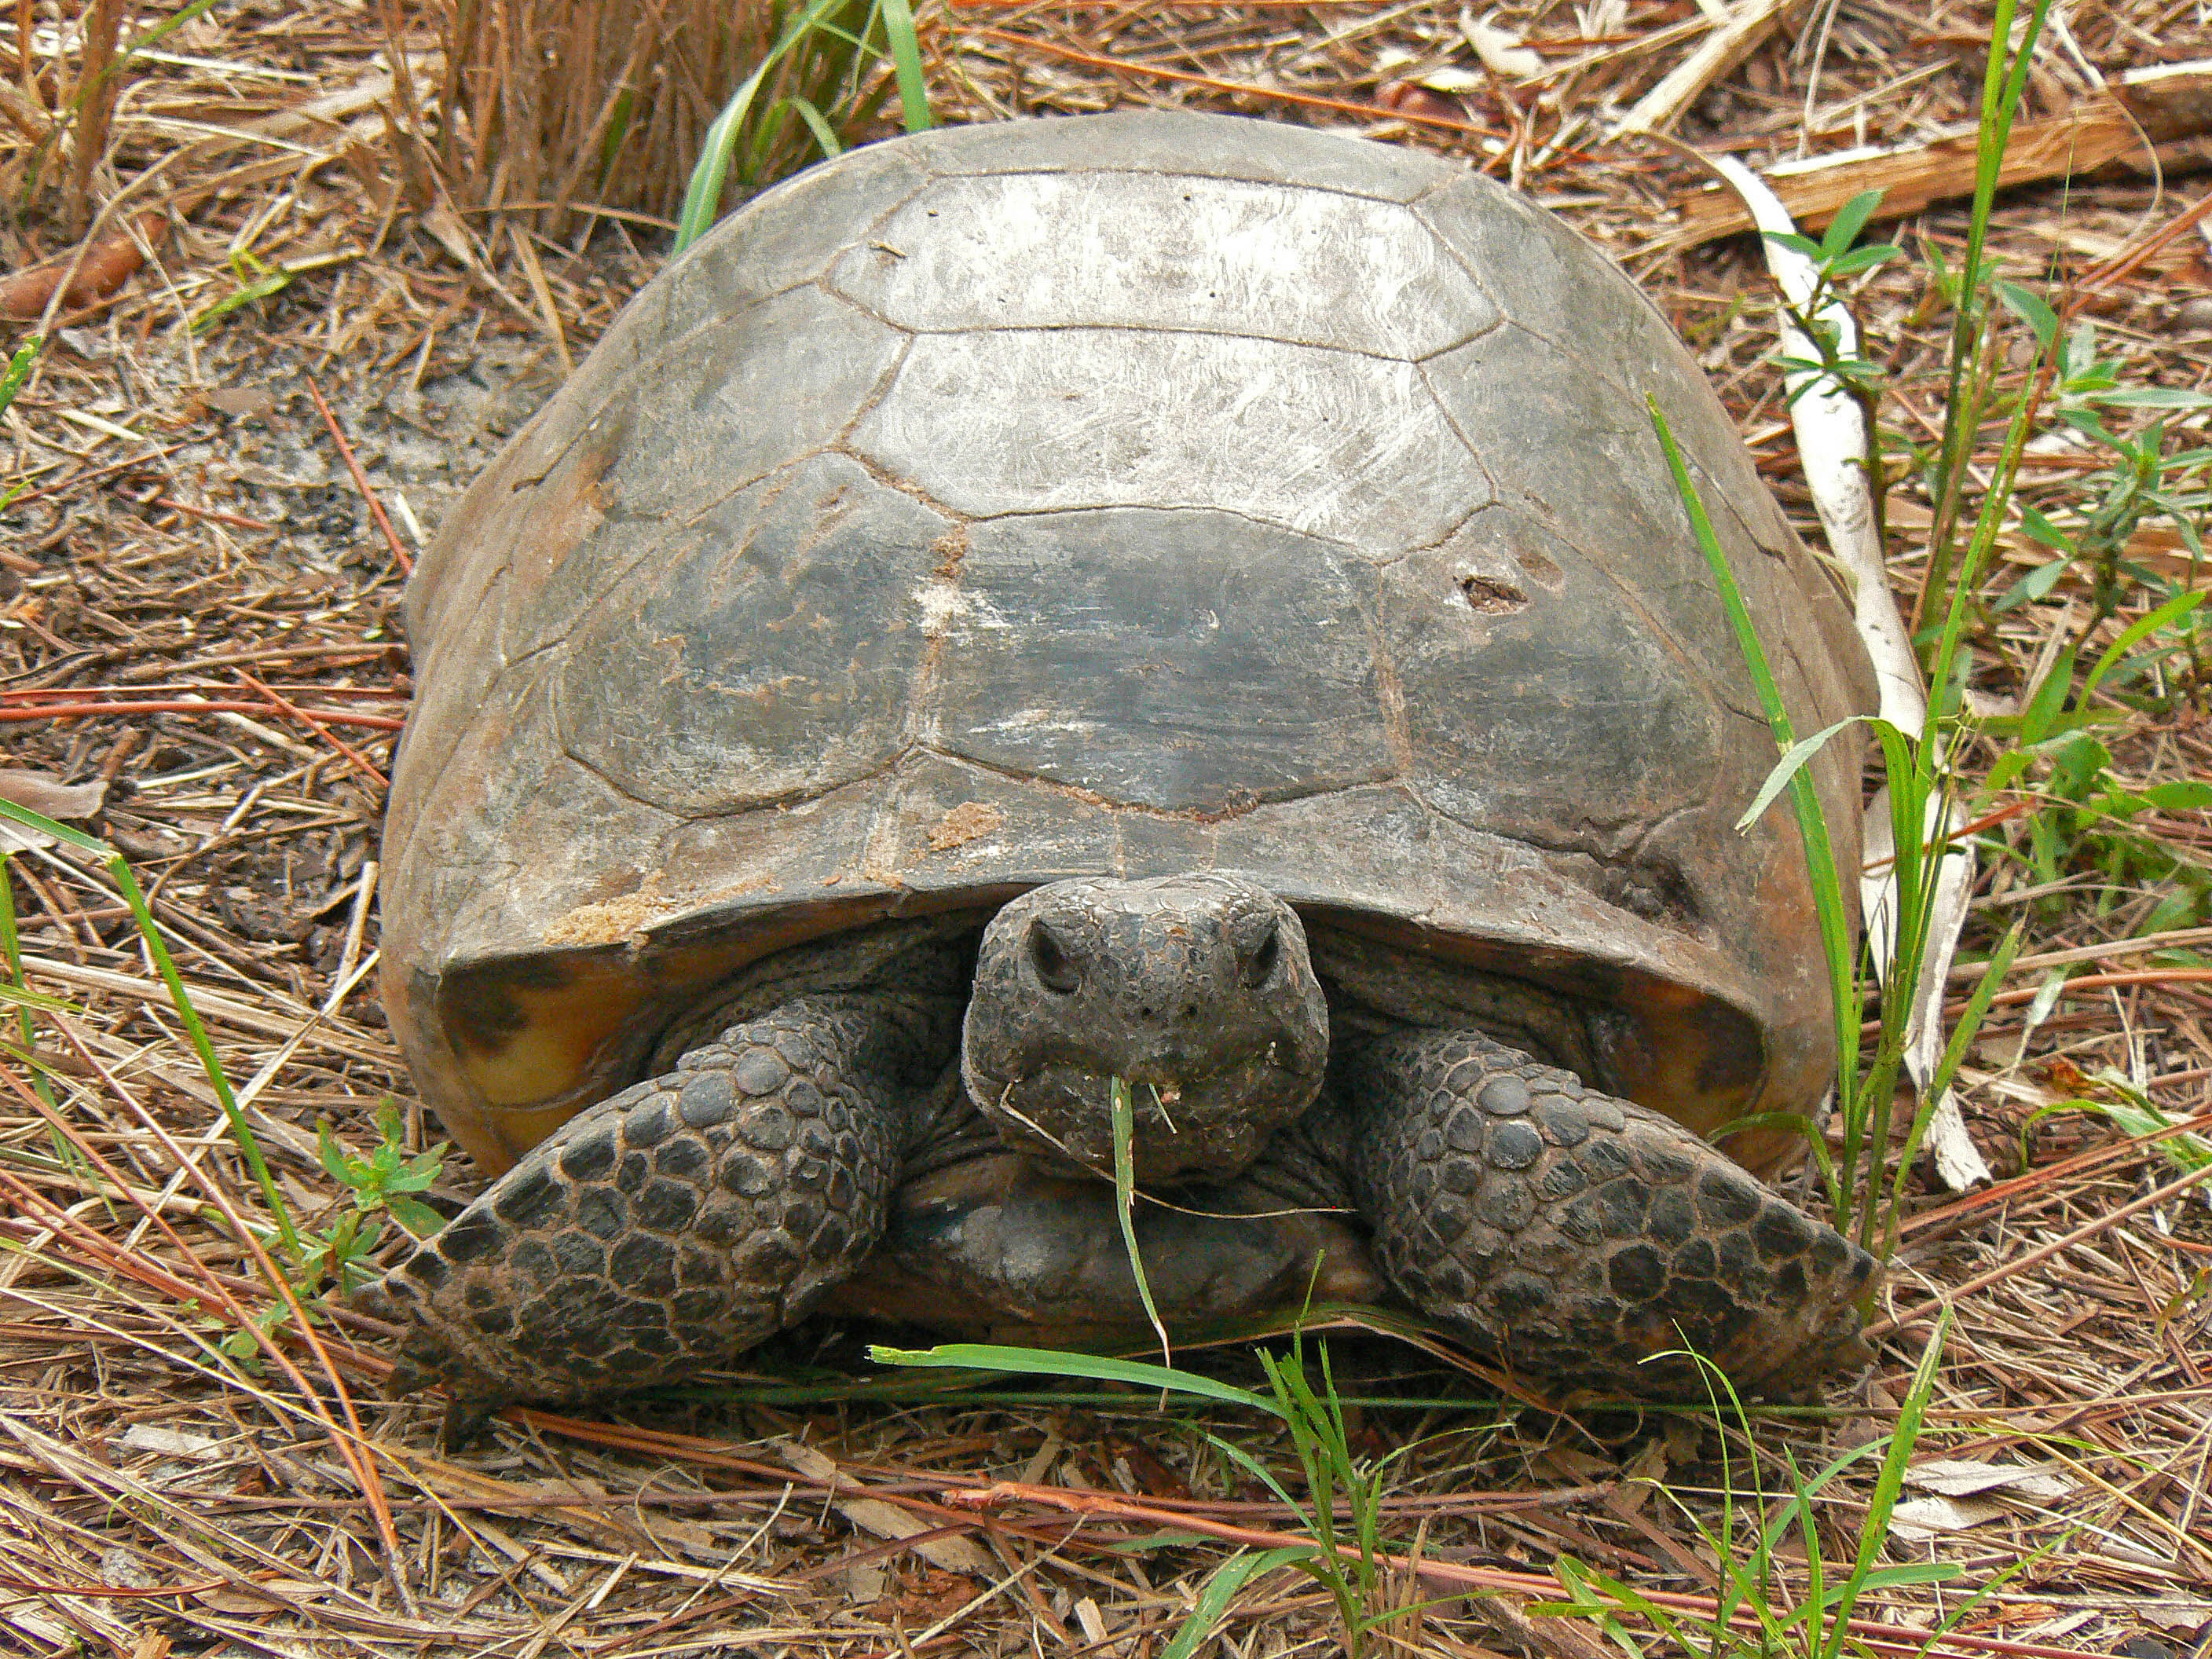 A close up of an adult gopher tortoise eating grass.